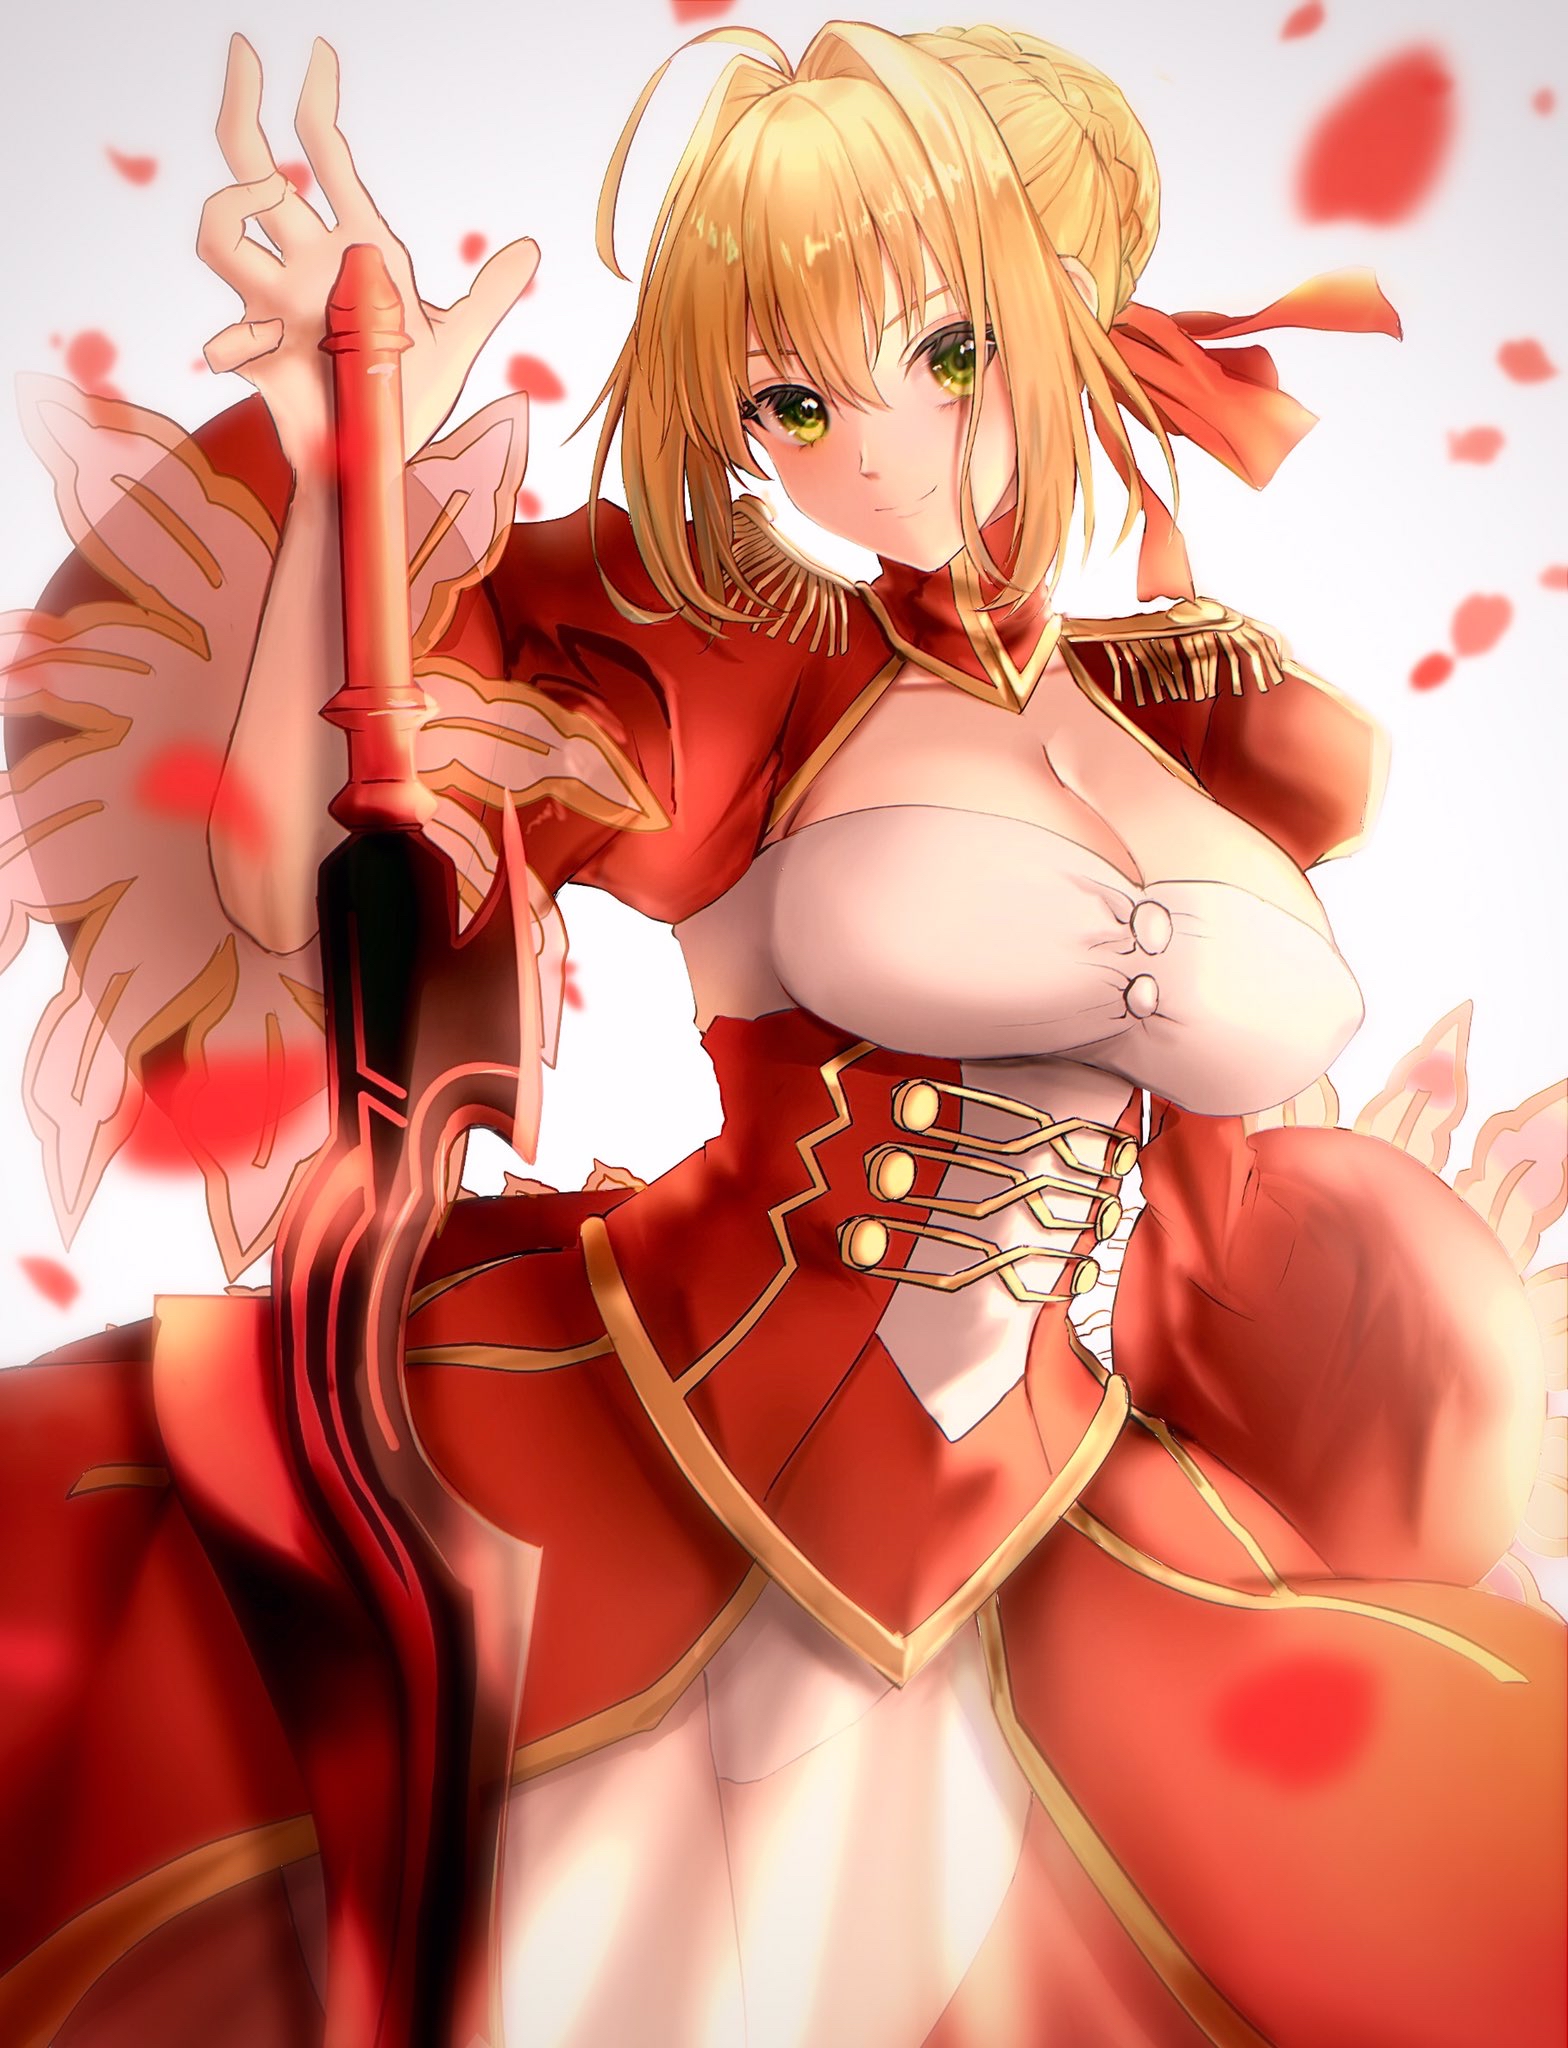 Anime 1568x2048 anime anime girls Fate series Fate/Extra Fate/Extra CCC Fate/Grand Order Nero Claudius long hair blonde solo artwork digital art fan art petals green eyes